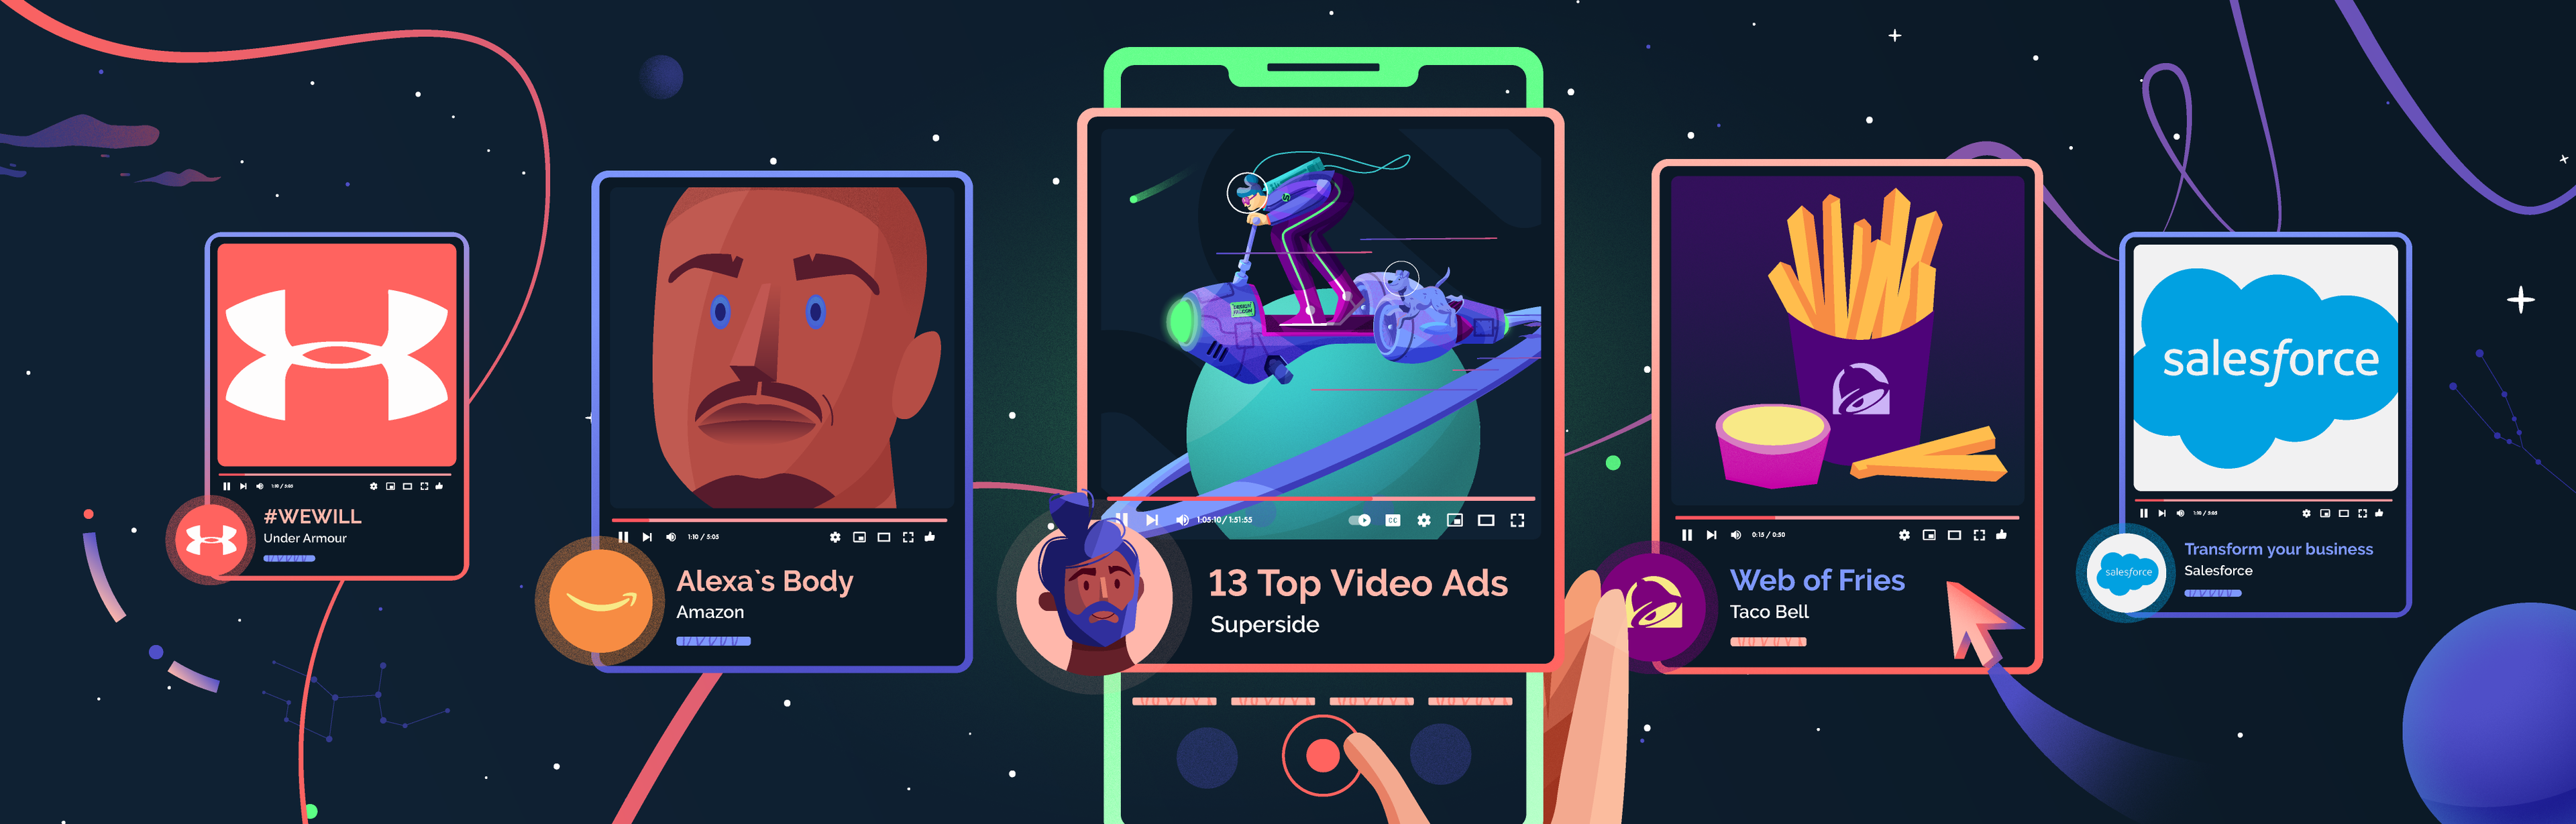 13 Of Top Video Ads to Inspire Your Marketing Strategy - Superside 